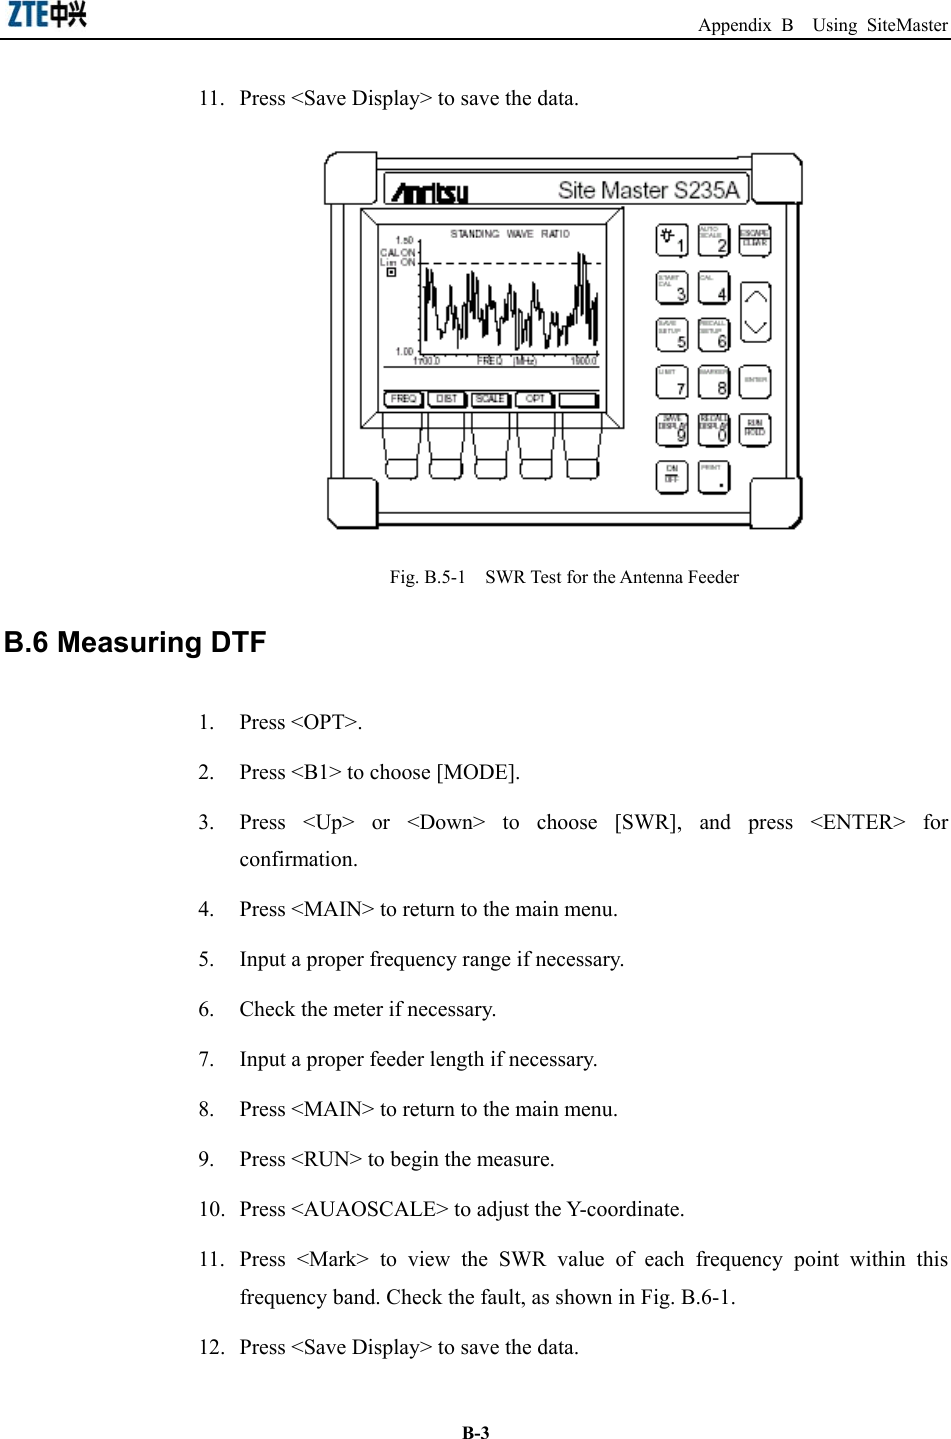                                                                  Appendix B  Using SiteMaster  B-311.  Press &lt;Save Display&gt; to save the data.    Fig. B.5-1    SWR Test for the Antenna Feeder   B.6 Measuring DTF   1. Press &lt;OPT&gt;.  2.  Press &lt;B1&gt; to choose [MODE].   3.  Press &lt;Up&gt; or &lt;Down&gt; to choose [SWR], and press &lt;ENTER&gt; for confirmation. 4.  Press &lt;MAIN&gt; to return to the main menu.   5.  Input a proper frequency range if necessary. 6.  Check the meter if necessary. 7.  Input a proper feeder length if necessary. 8.  Press &lt;MAIN&gt; to return to the main menu.   9.  Press &lt;RUN&gt; to begin the measure.   10.  Press &lt;AUAOSCALE&gt; to adjust the Y-coordinate. 11.  Press &lt;Mark&gt; to view the SWR value of each frequency point within this frequency band. Check the fault, as shown in Fig. B.6-1. 12.  Press &lt;Save Display&gt; to save the data.   